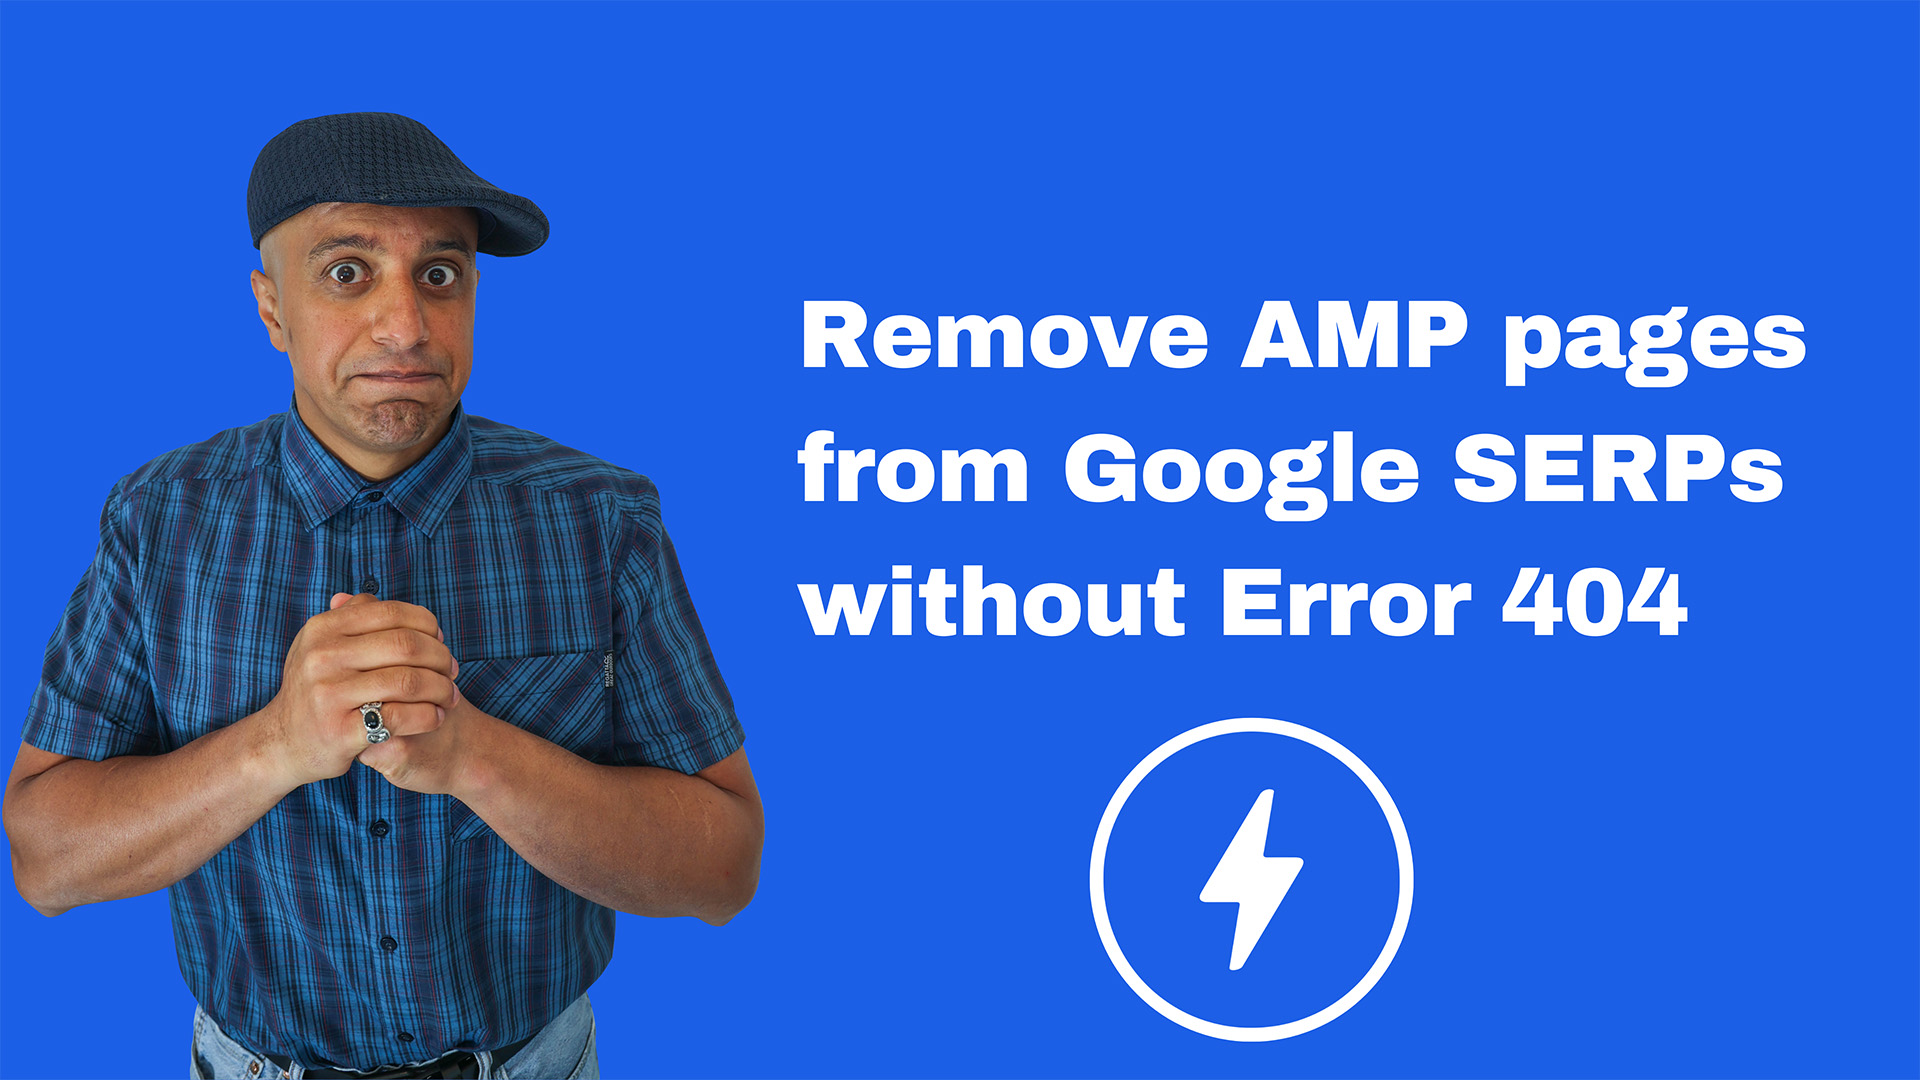 How to Fix Error 404 on AMP Pages After Deactivating the AMP Plugin